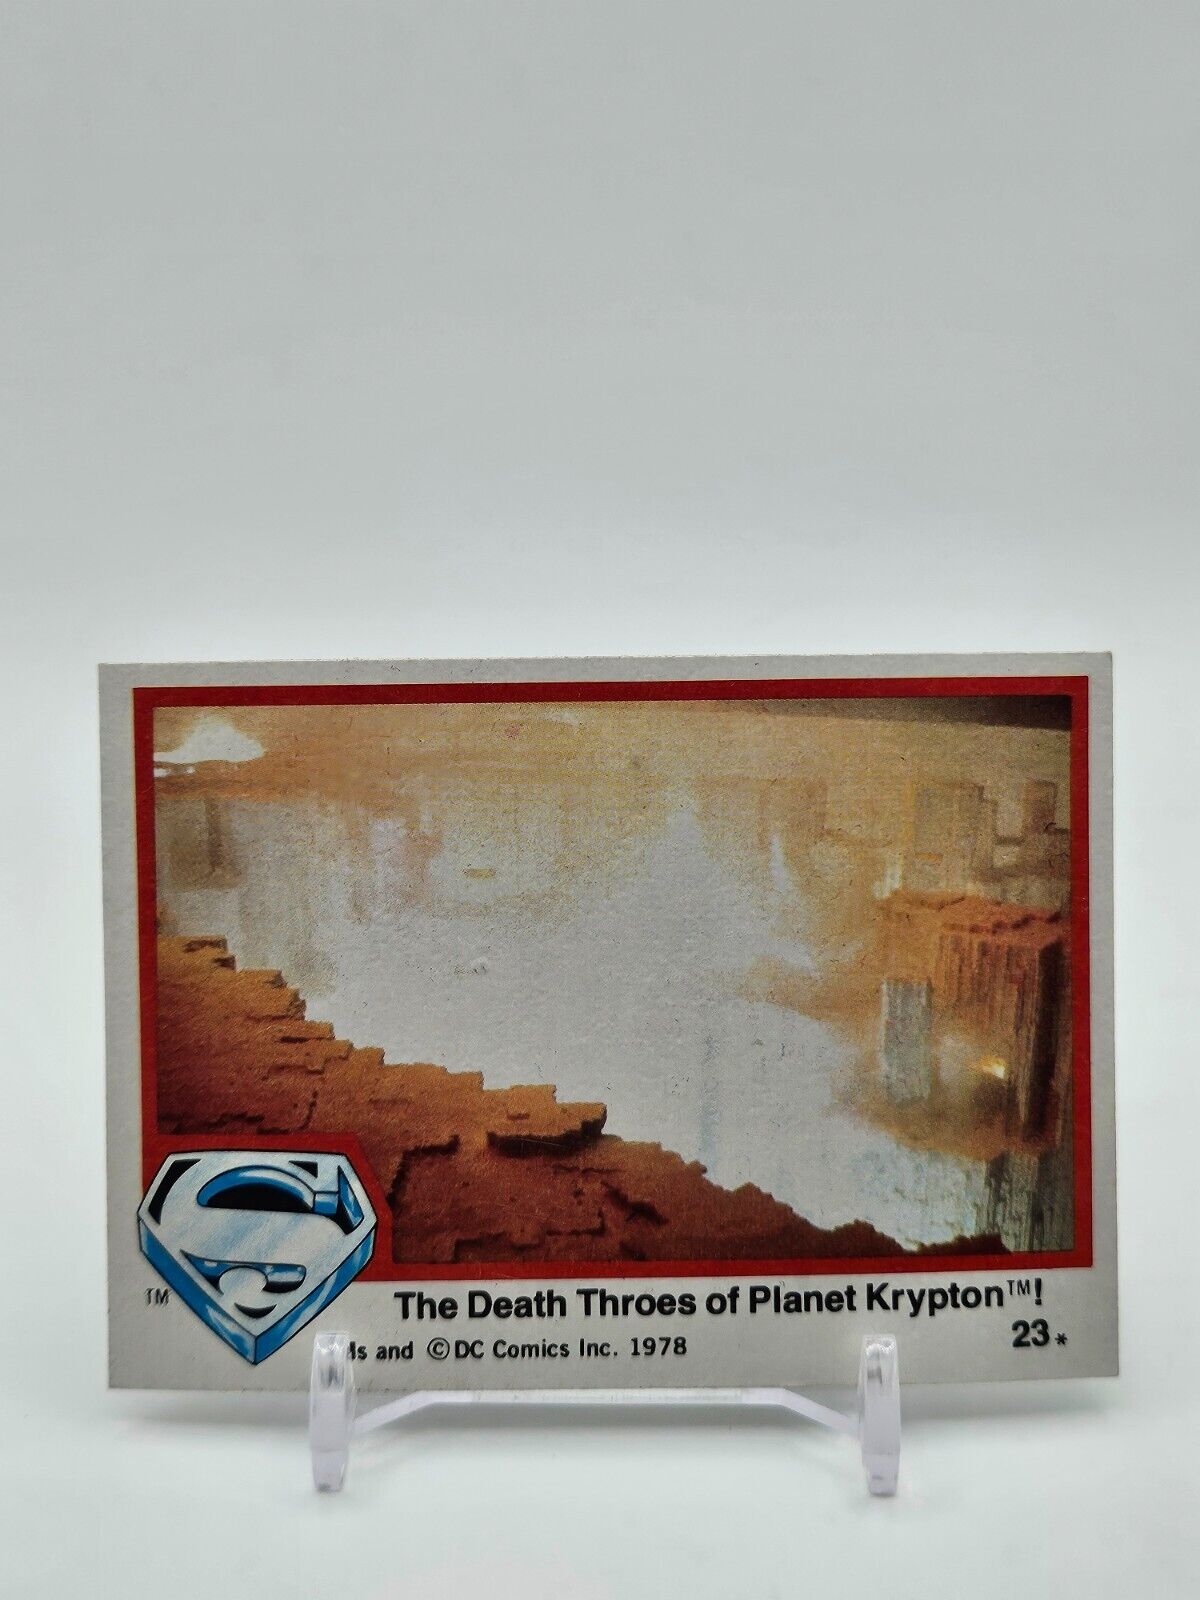 The Death Throes of Planet Krypton 1978 Topps SUPERMAN #23 VINTAGE DC